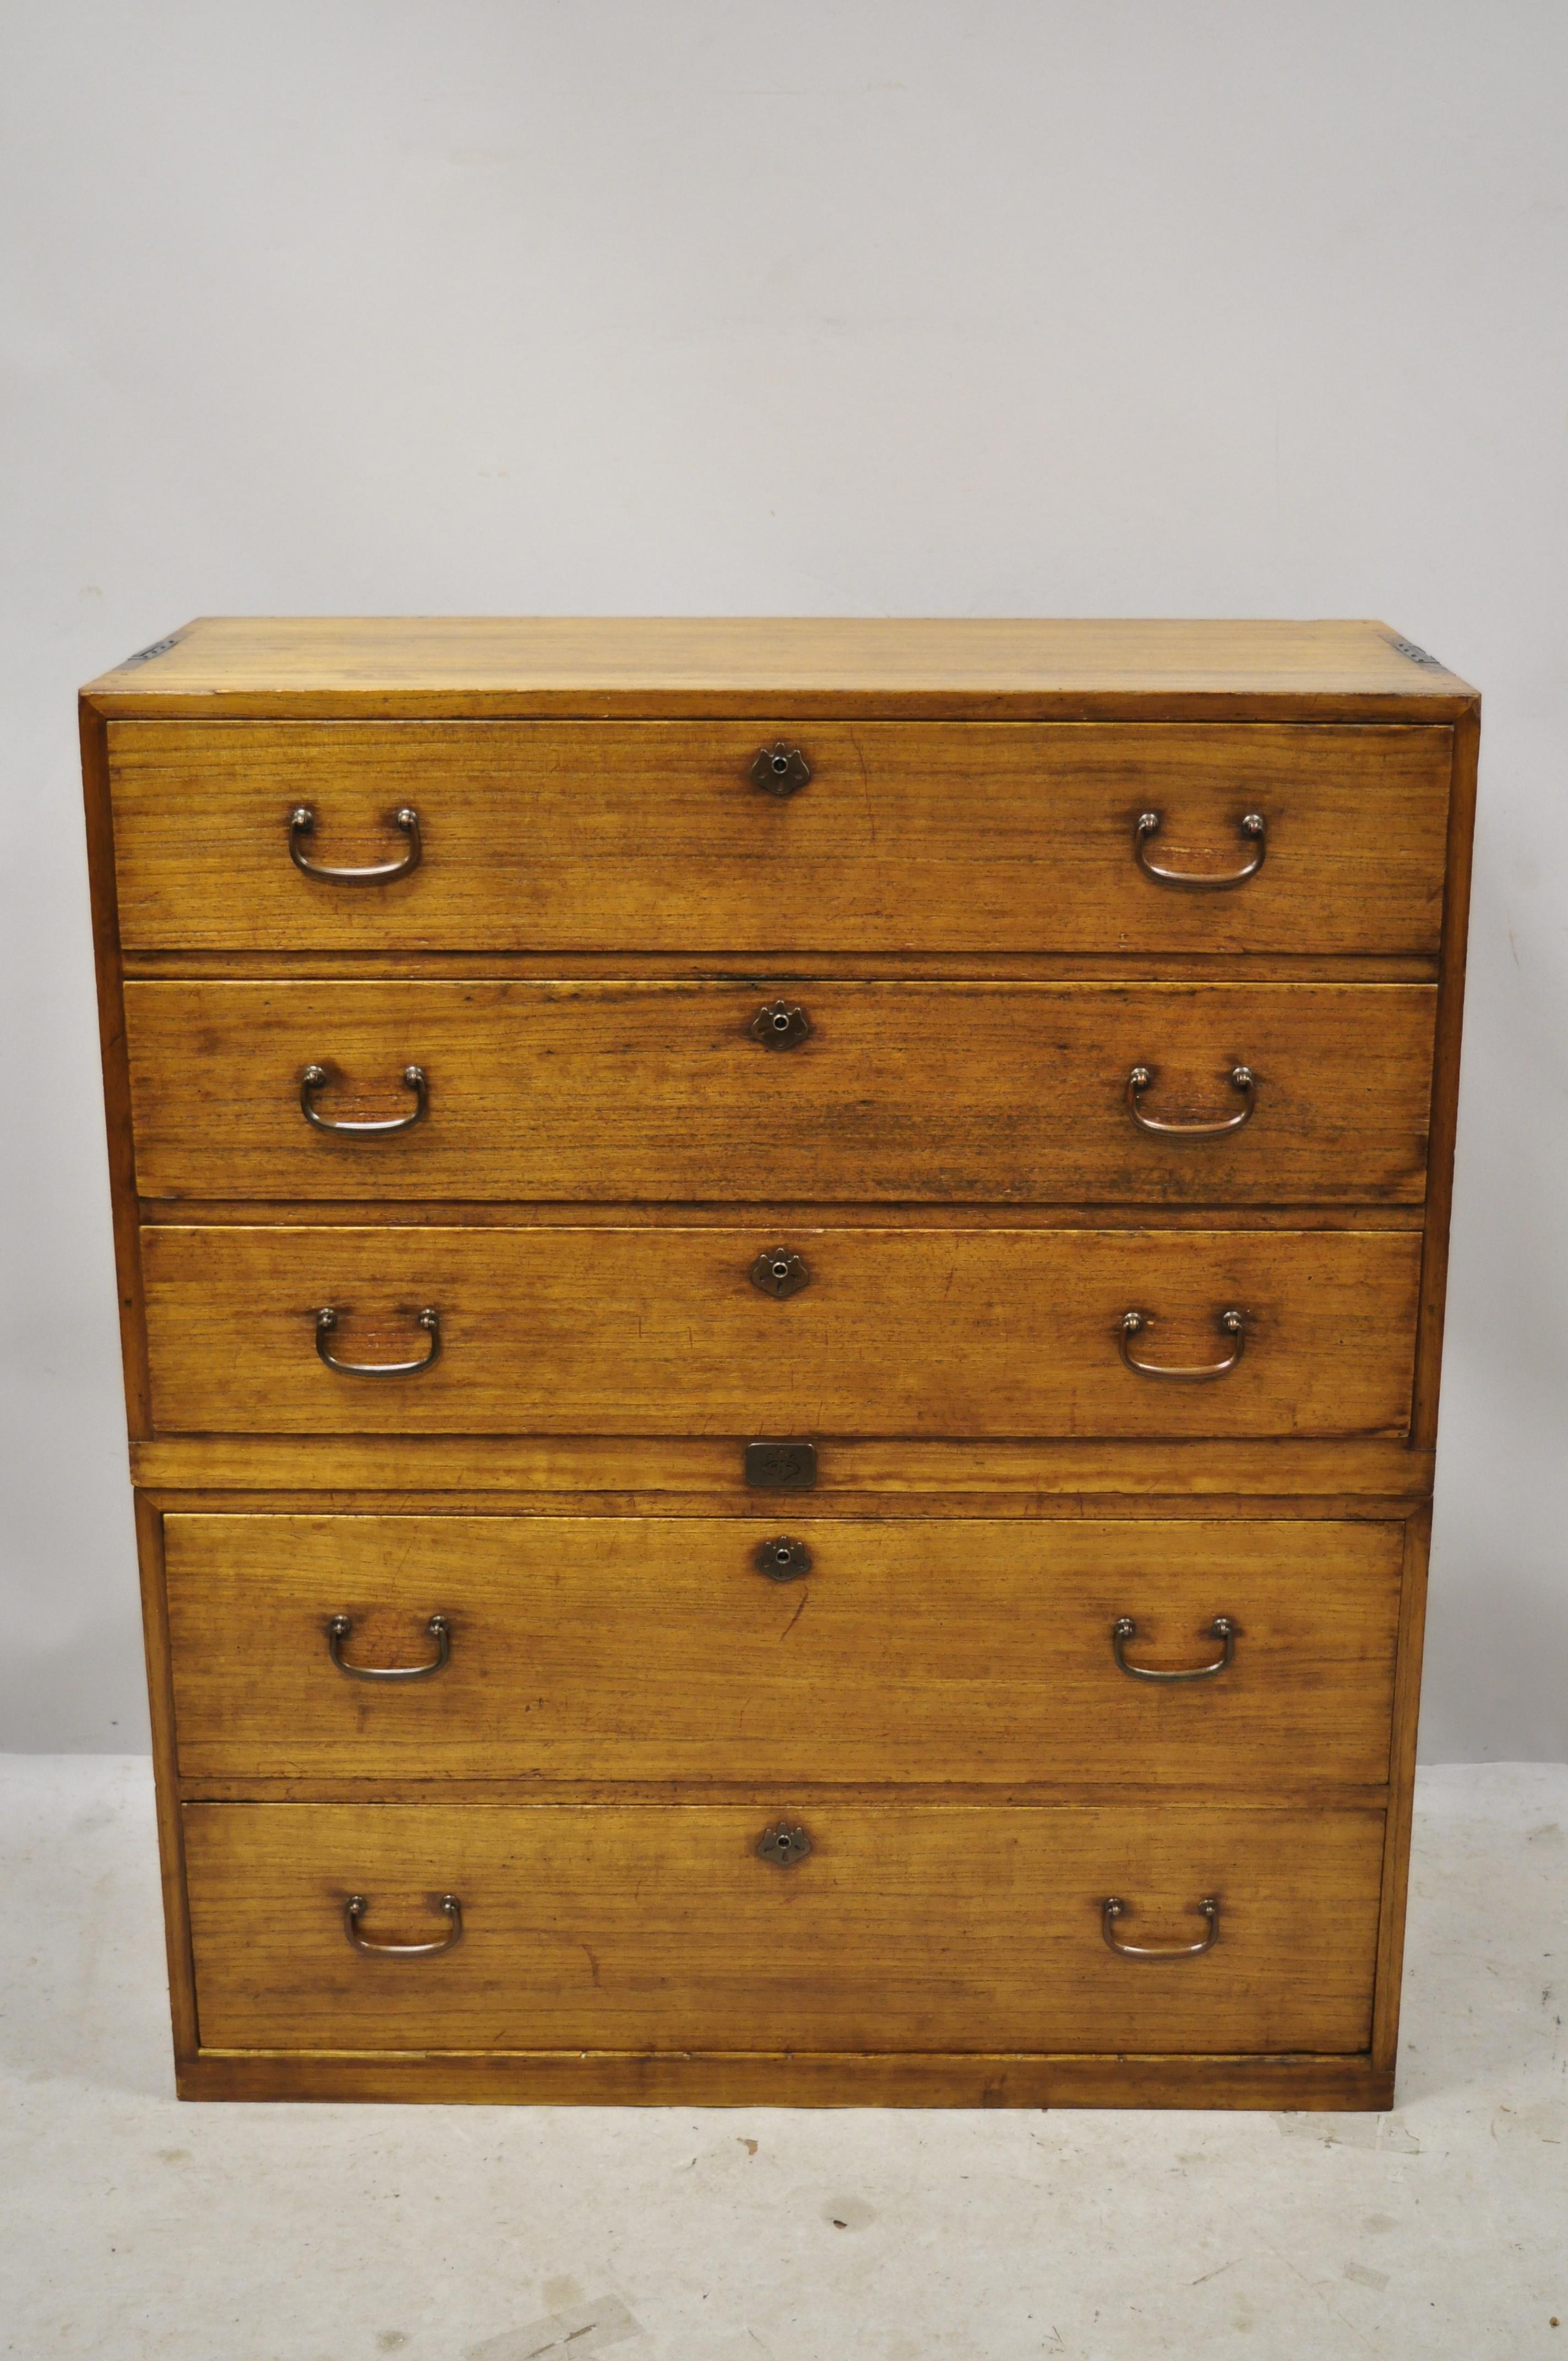 Antique Chinese Export Colonial Camphorwood stacked Campaign chest dresser. Item features iron handles, beautiful wood grain, 2 part construction, working lock and key, 5 drawers, very nice antique item, great style and form, circa early 1900s.